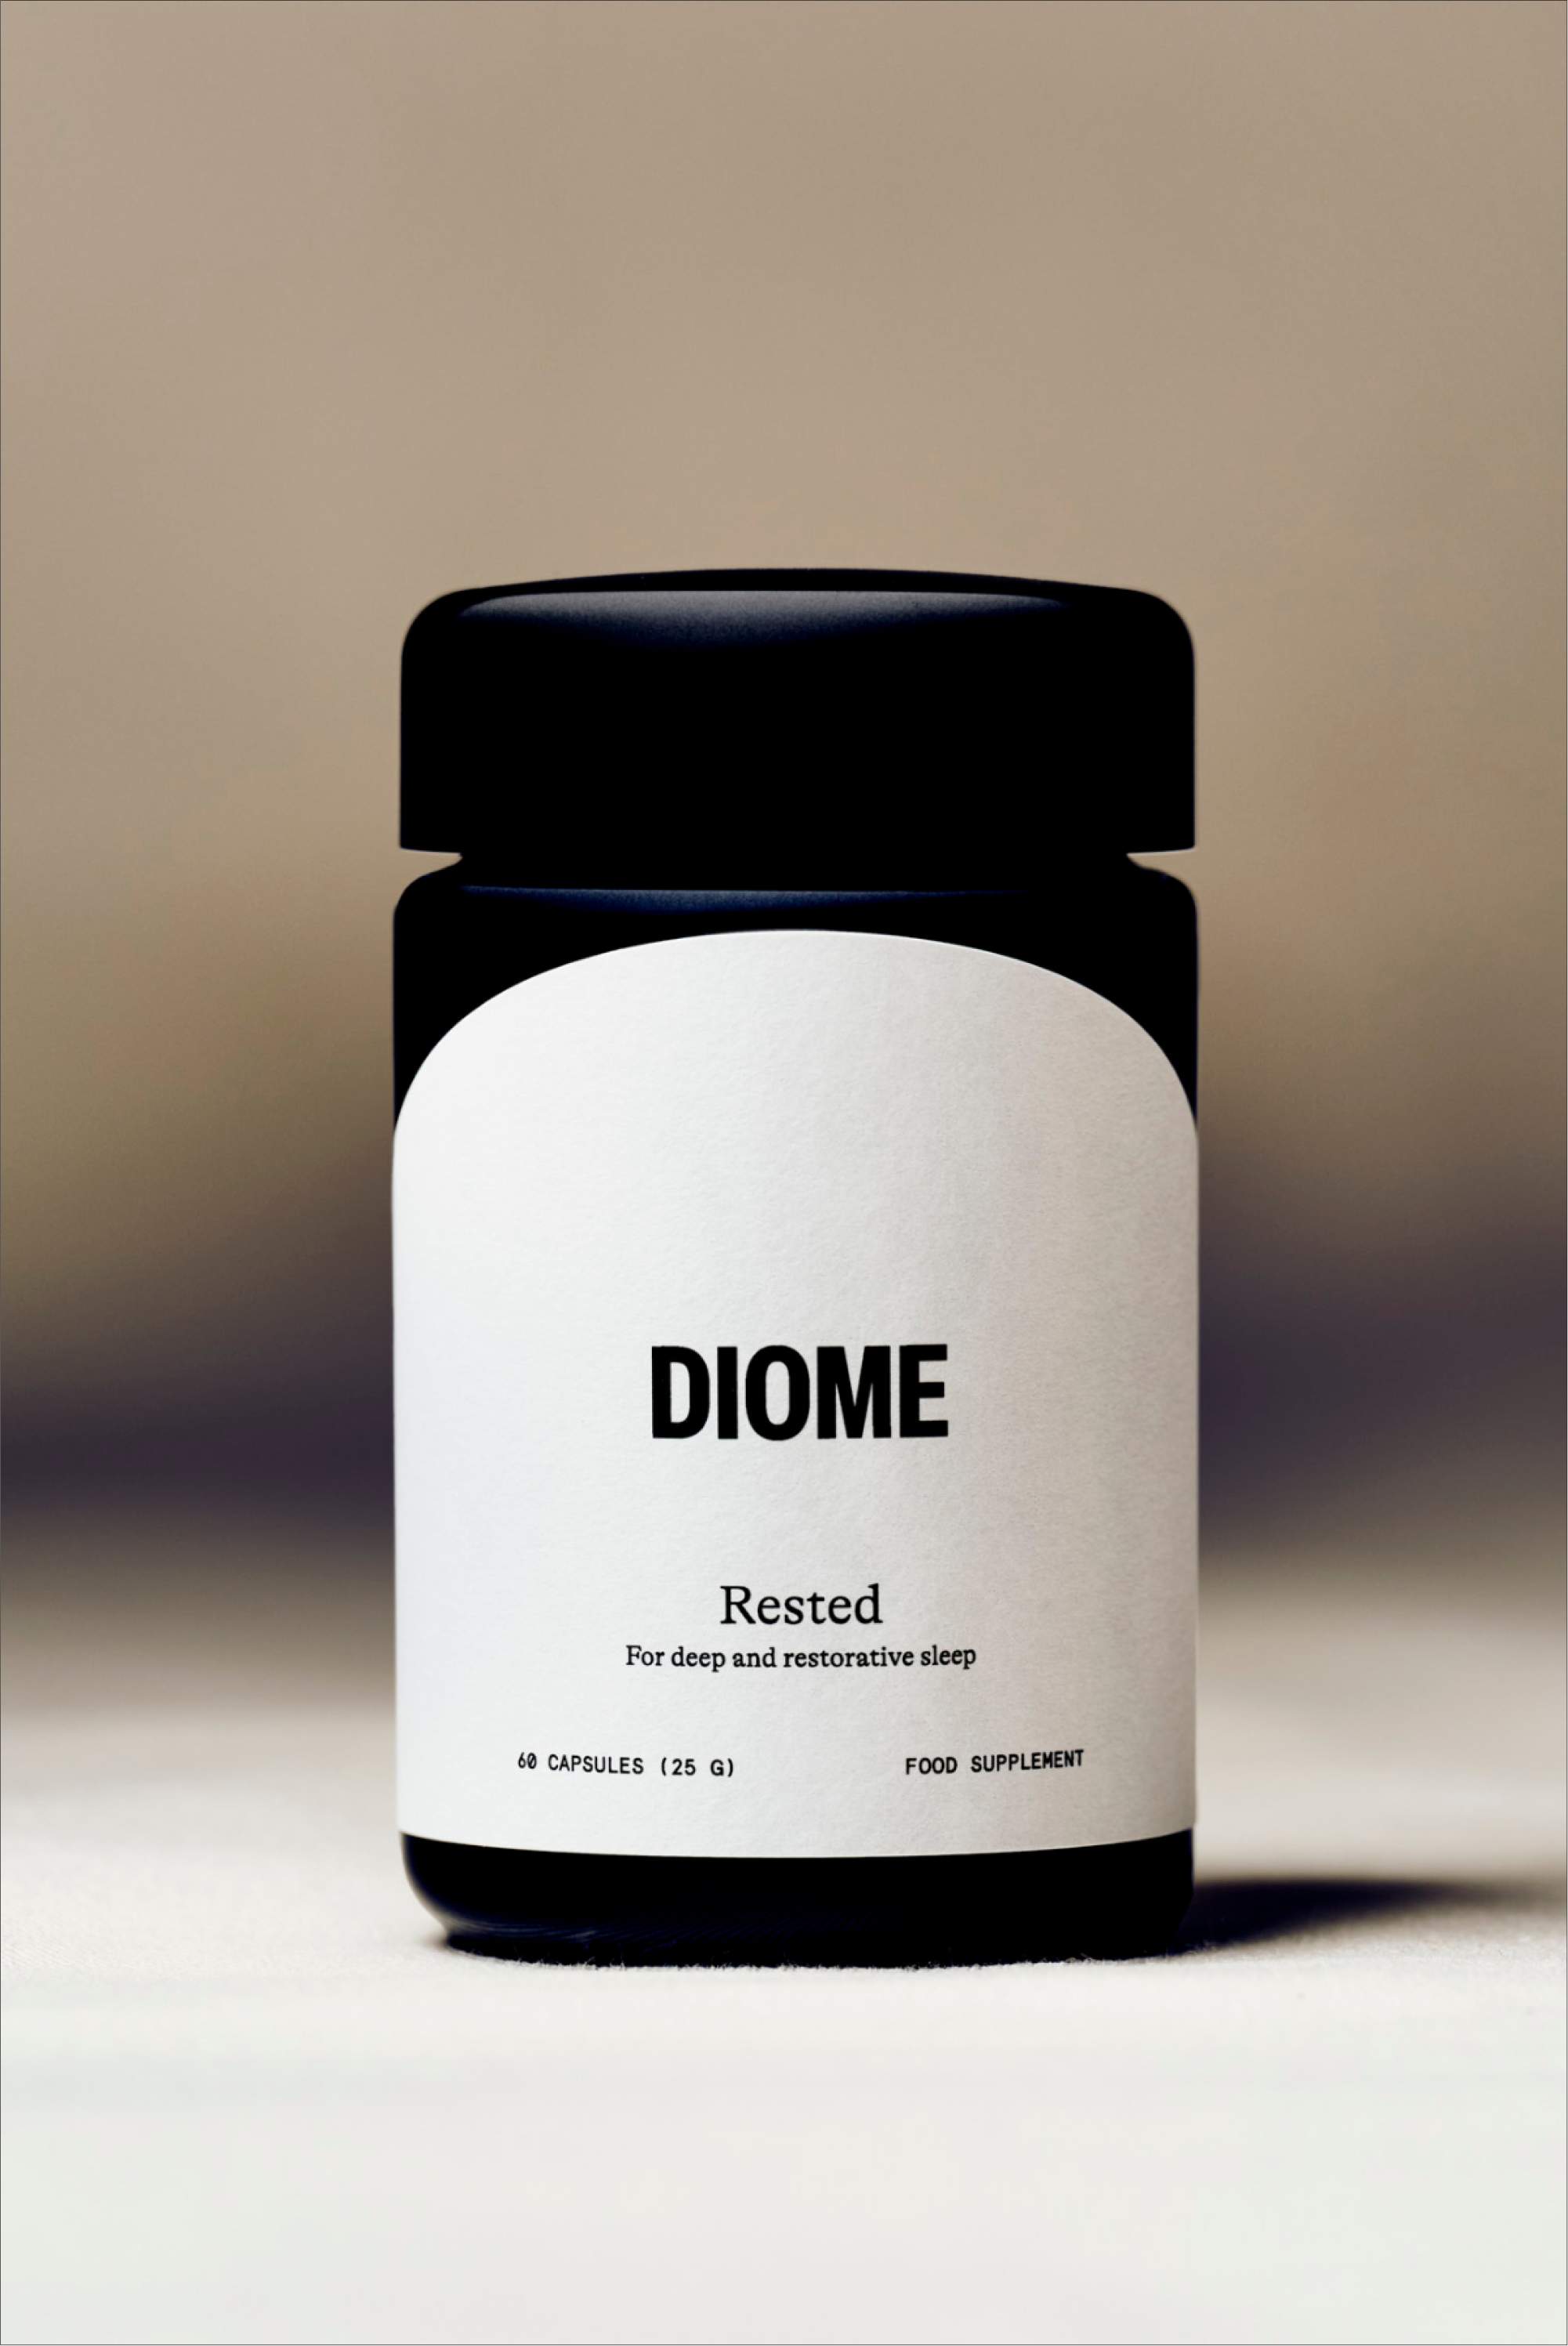 Diome Rested natural sleep supplement